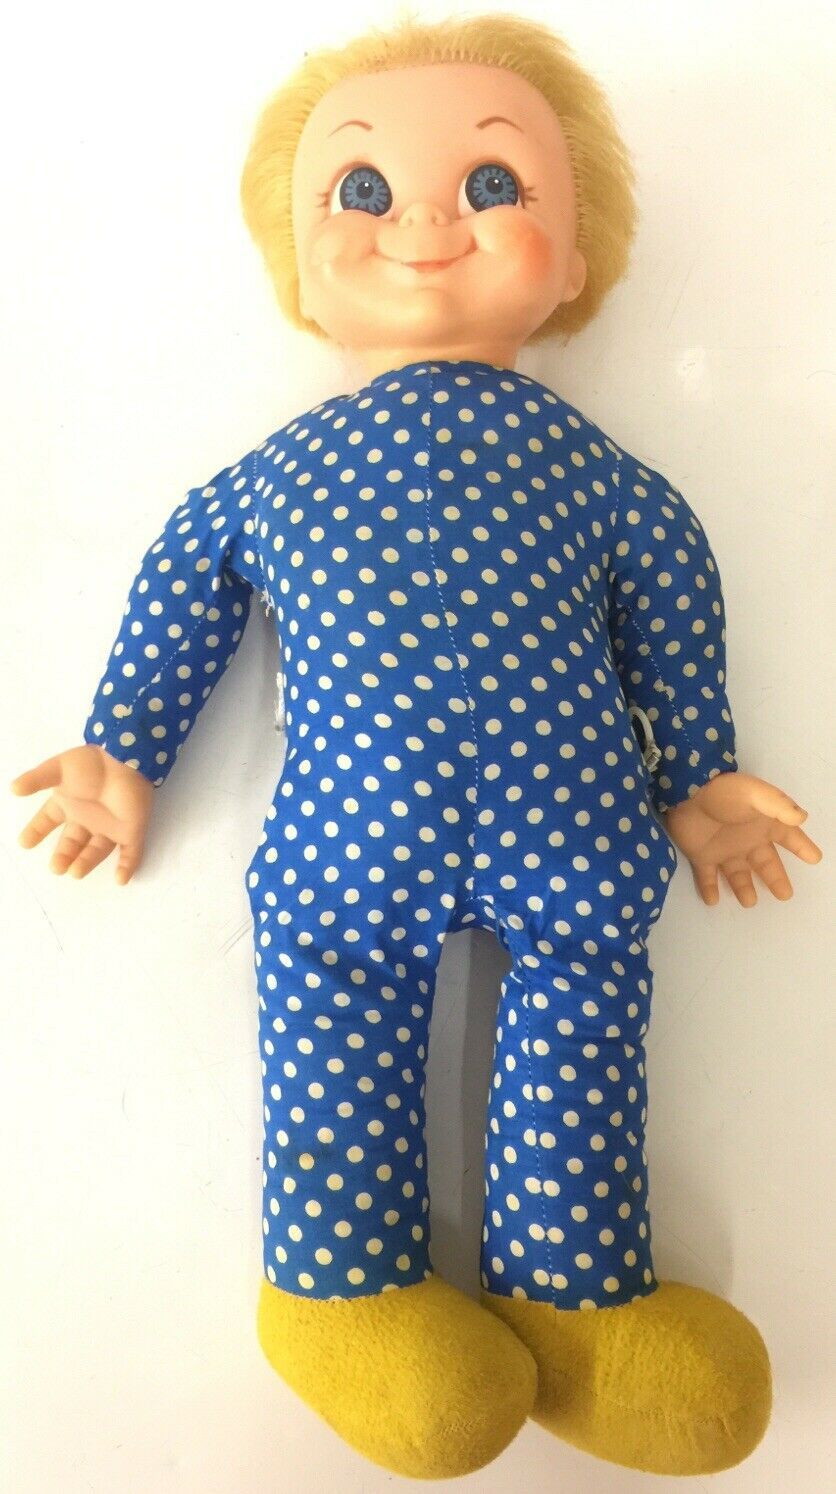 ms beasley doll for sale